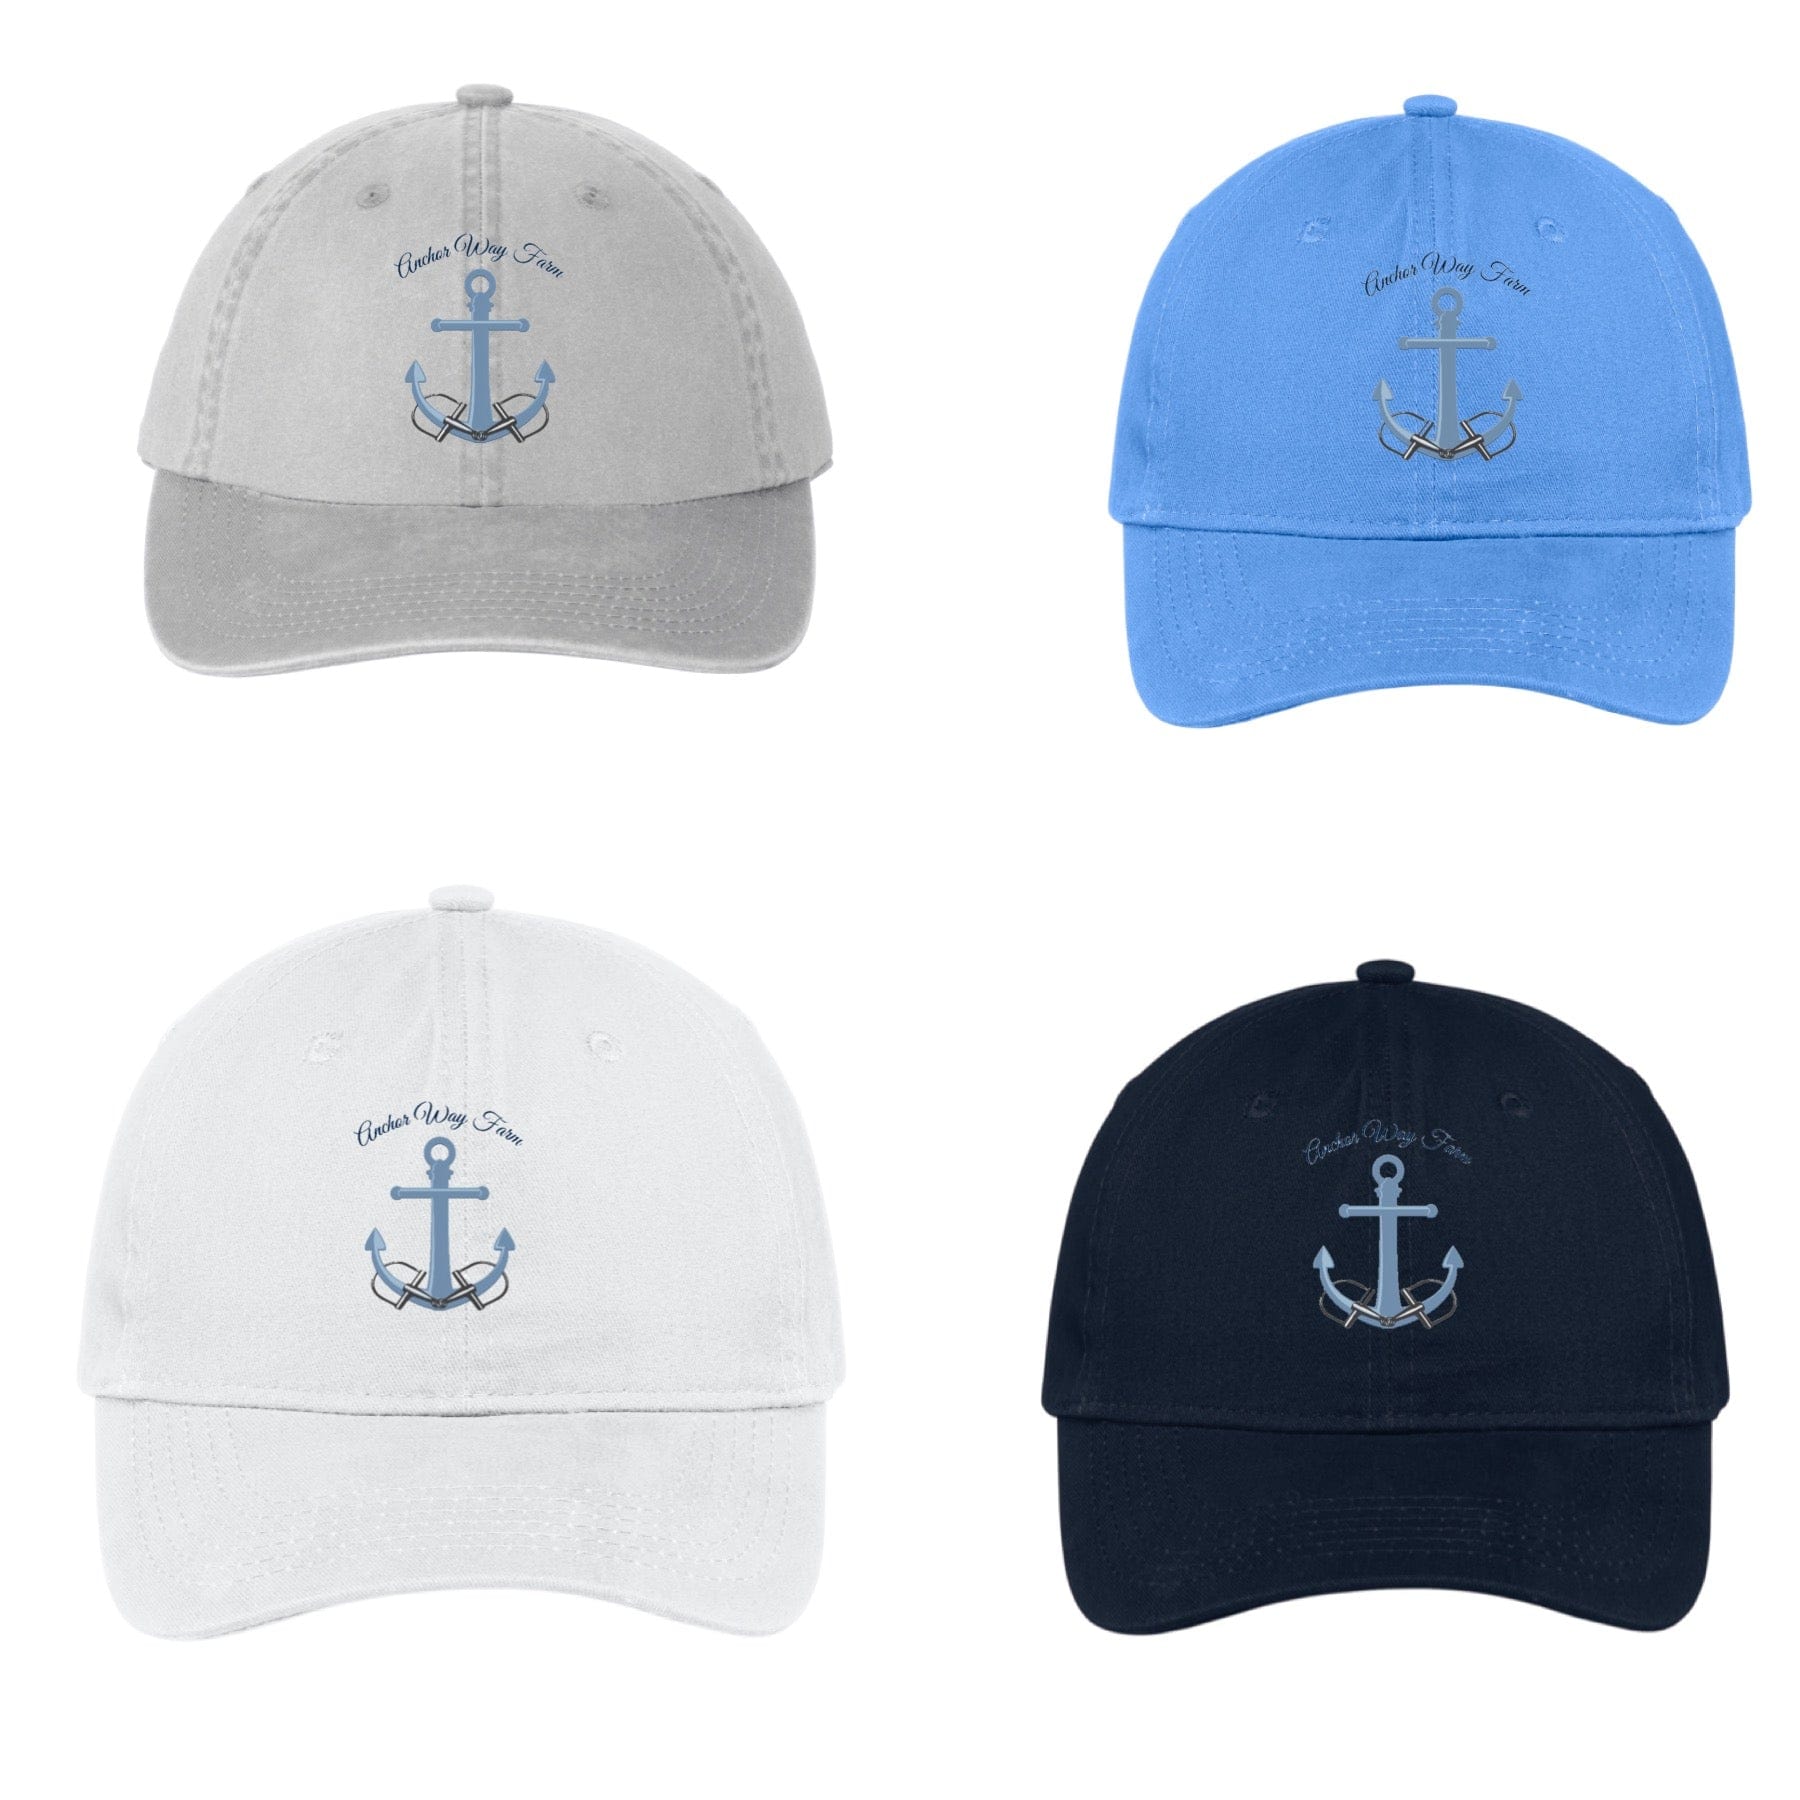 Equestrian Team Apparel Anchor Way Farm Baseball Cap equestrian team apparel online tack store mobile tack store custom farm apparel custom show stable clothing equestrian lifestyle horse show clothing riding clothes horses equestrian tack store